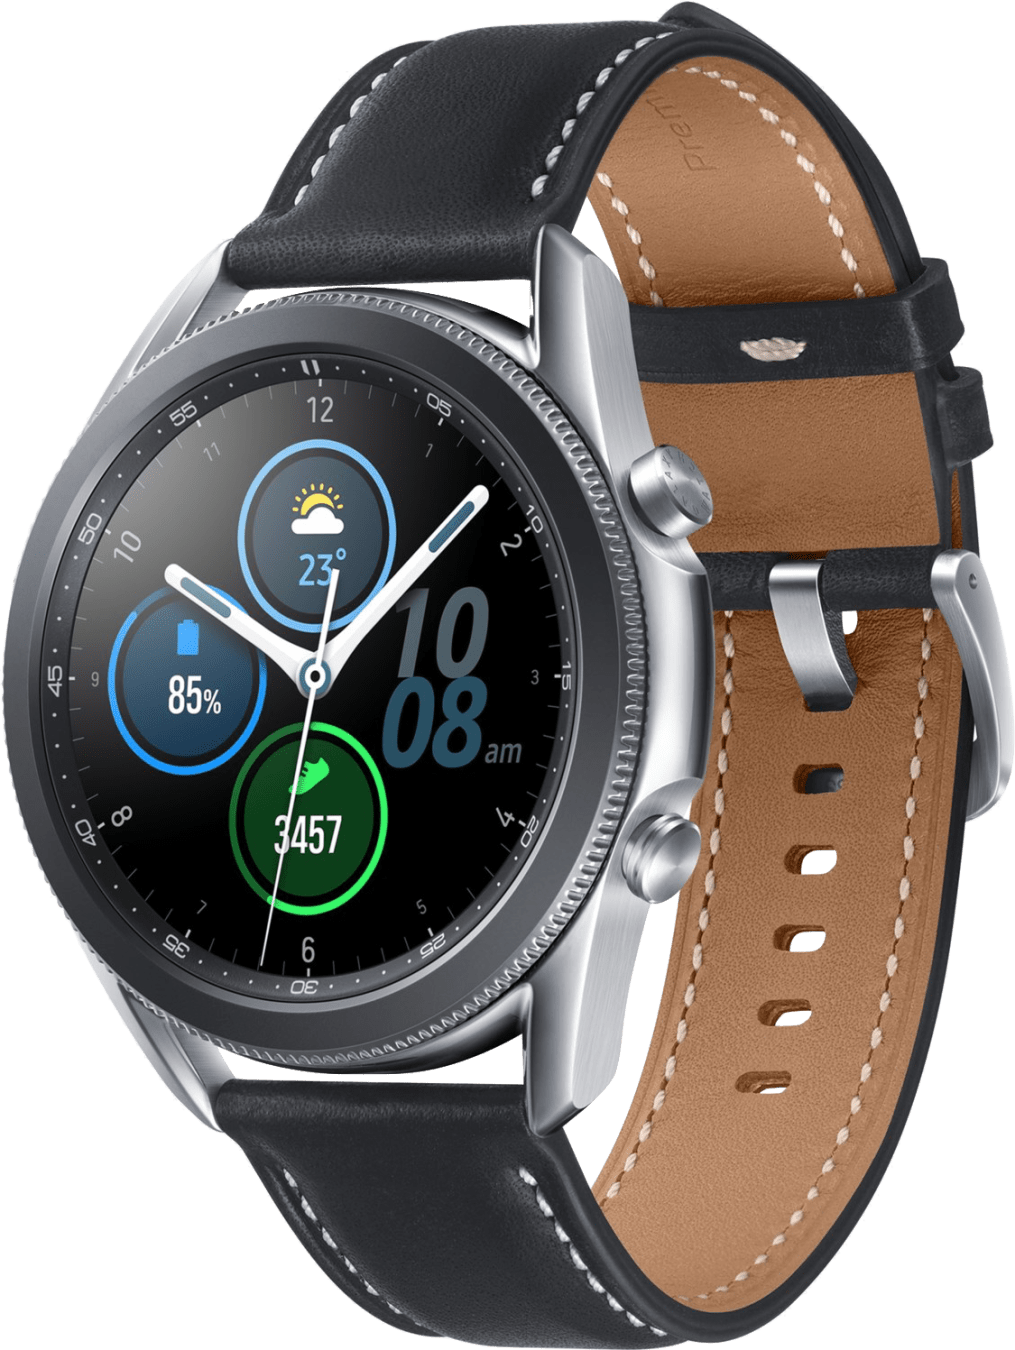 Samsung Galaxy Watch3, 45mm Stainless steel case, Real leather band